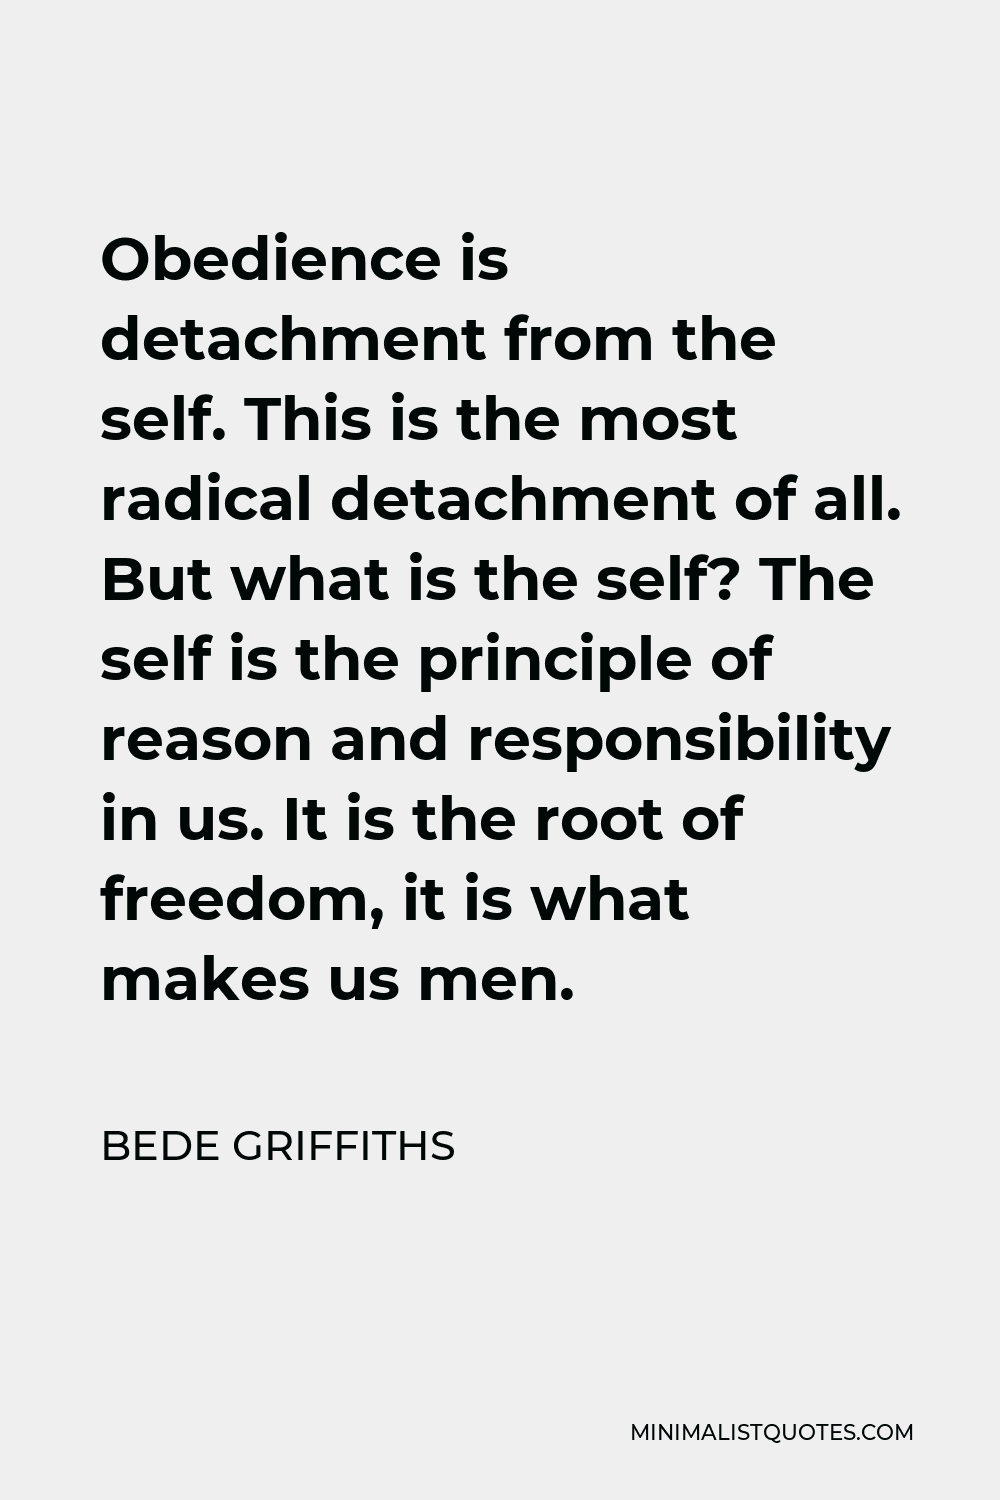 Bede Griffiths Quote - Obedience is detachment from the self. This is the most radical detachment of all. But what is the self? The self is the principle of reason and responsibility in us. It is the root of freedom, it is what makes us men.